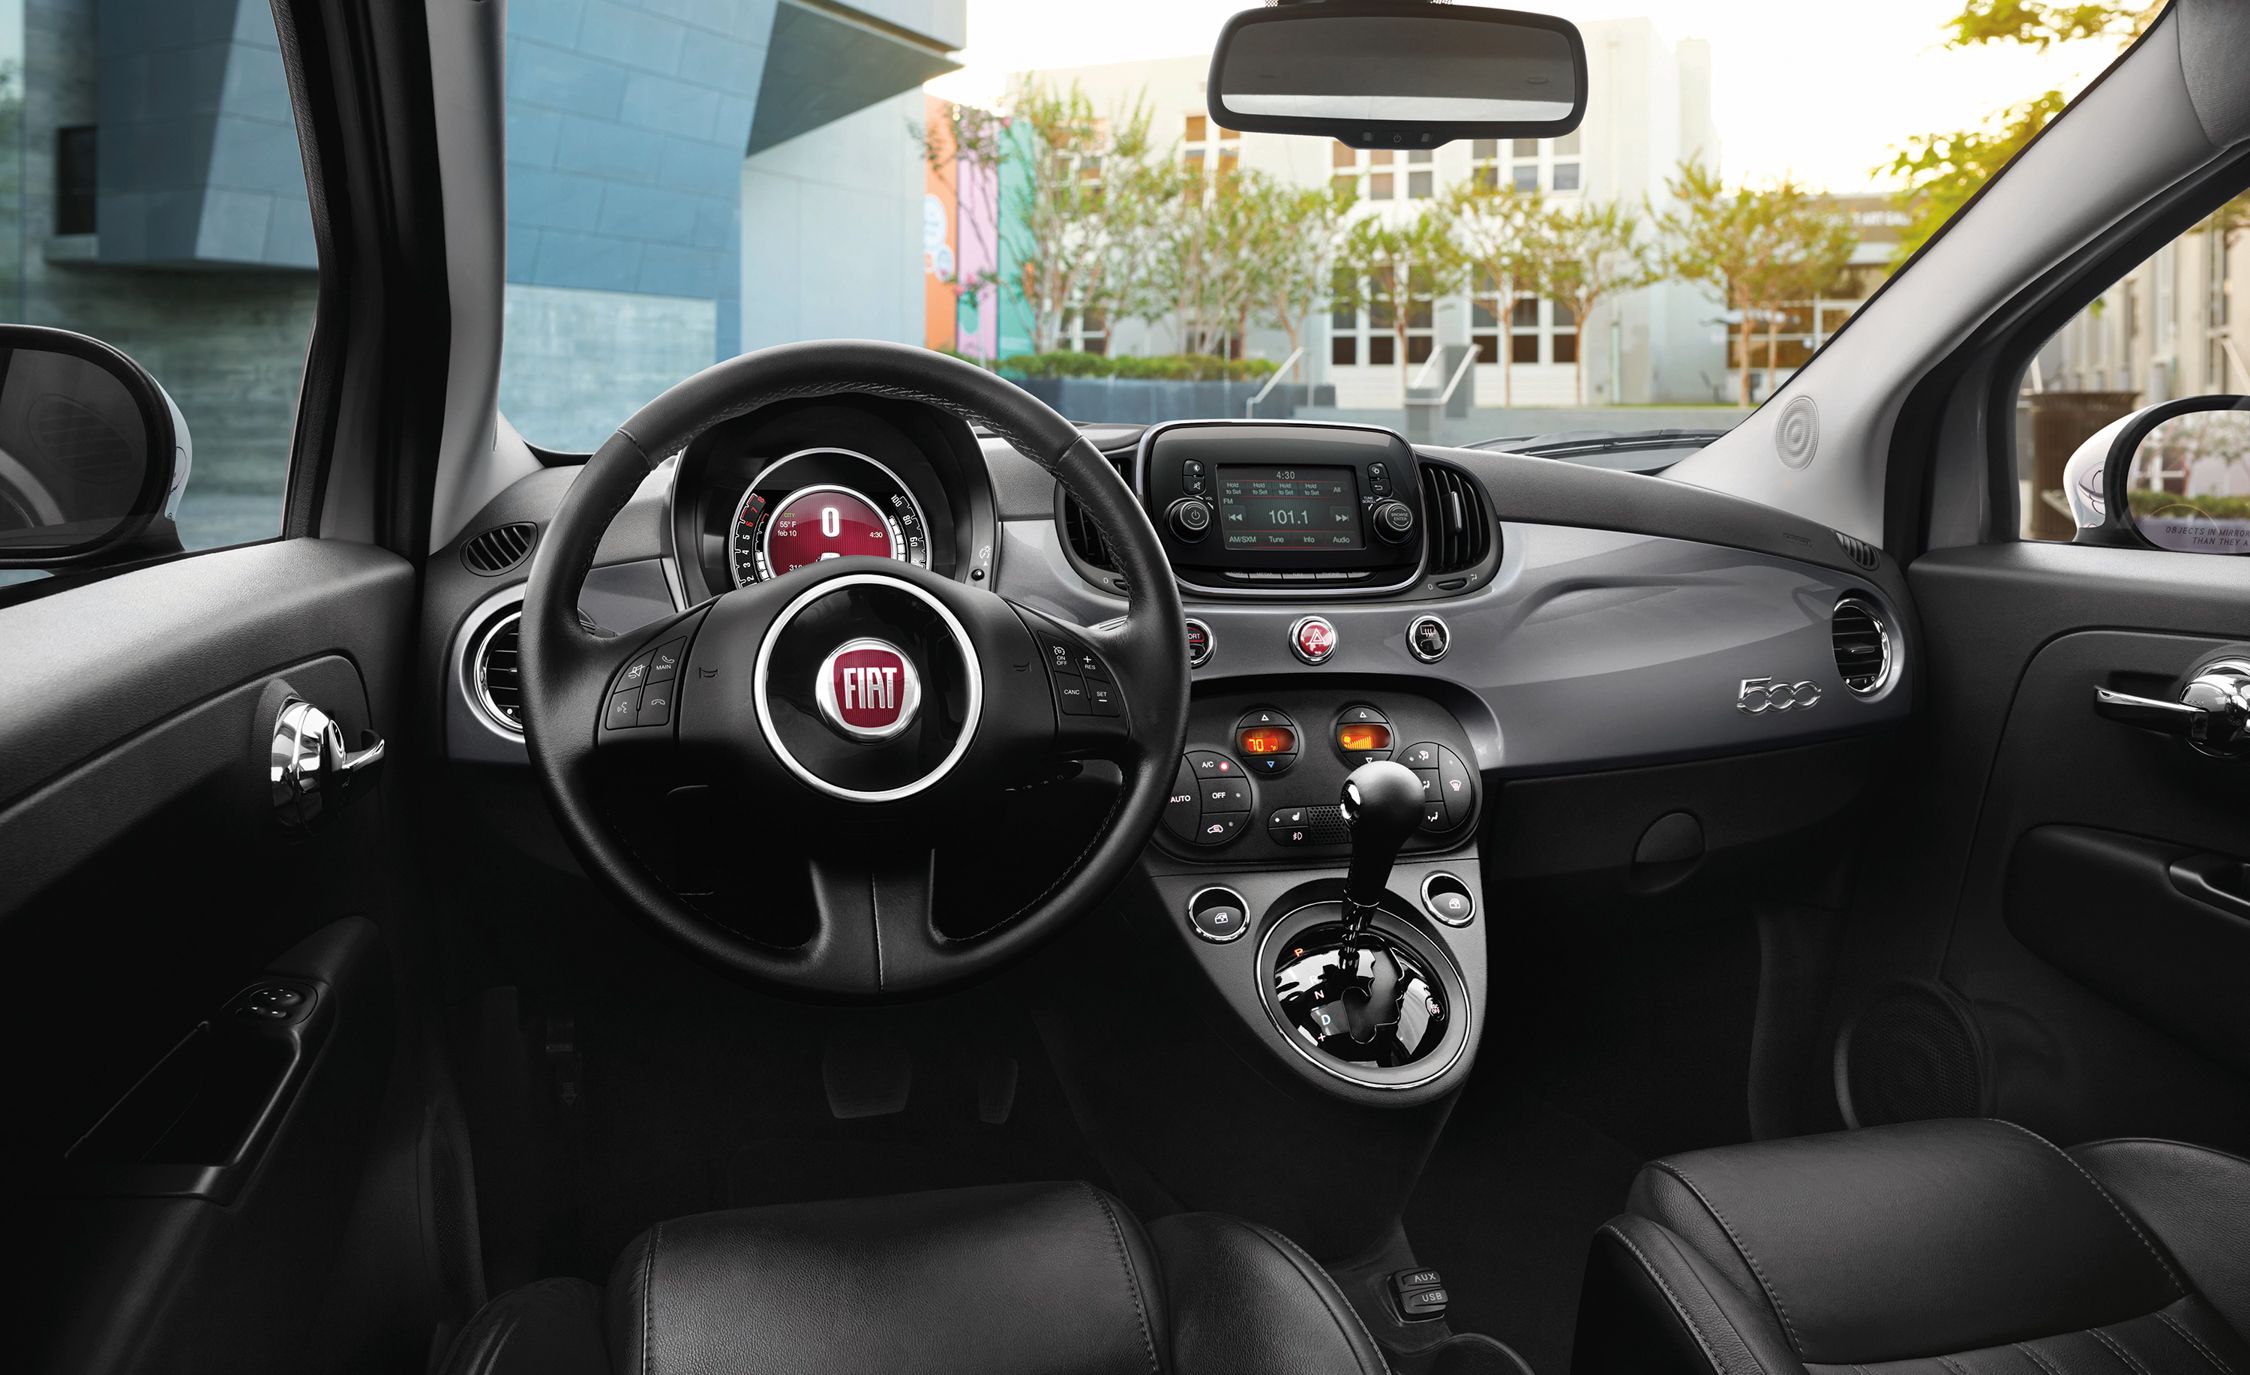 fiat 500 manual or automatic